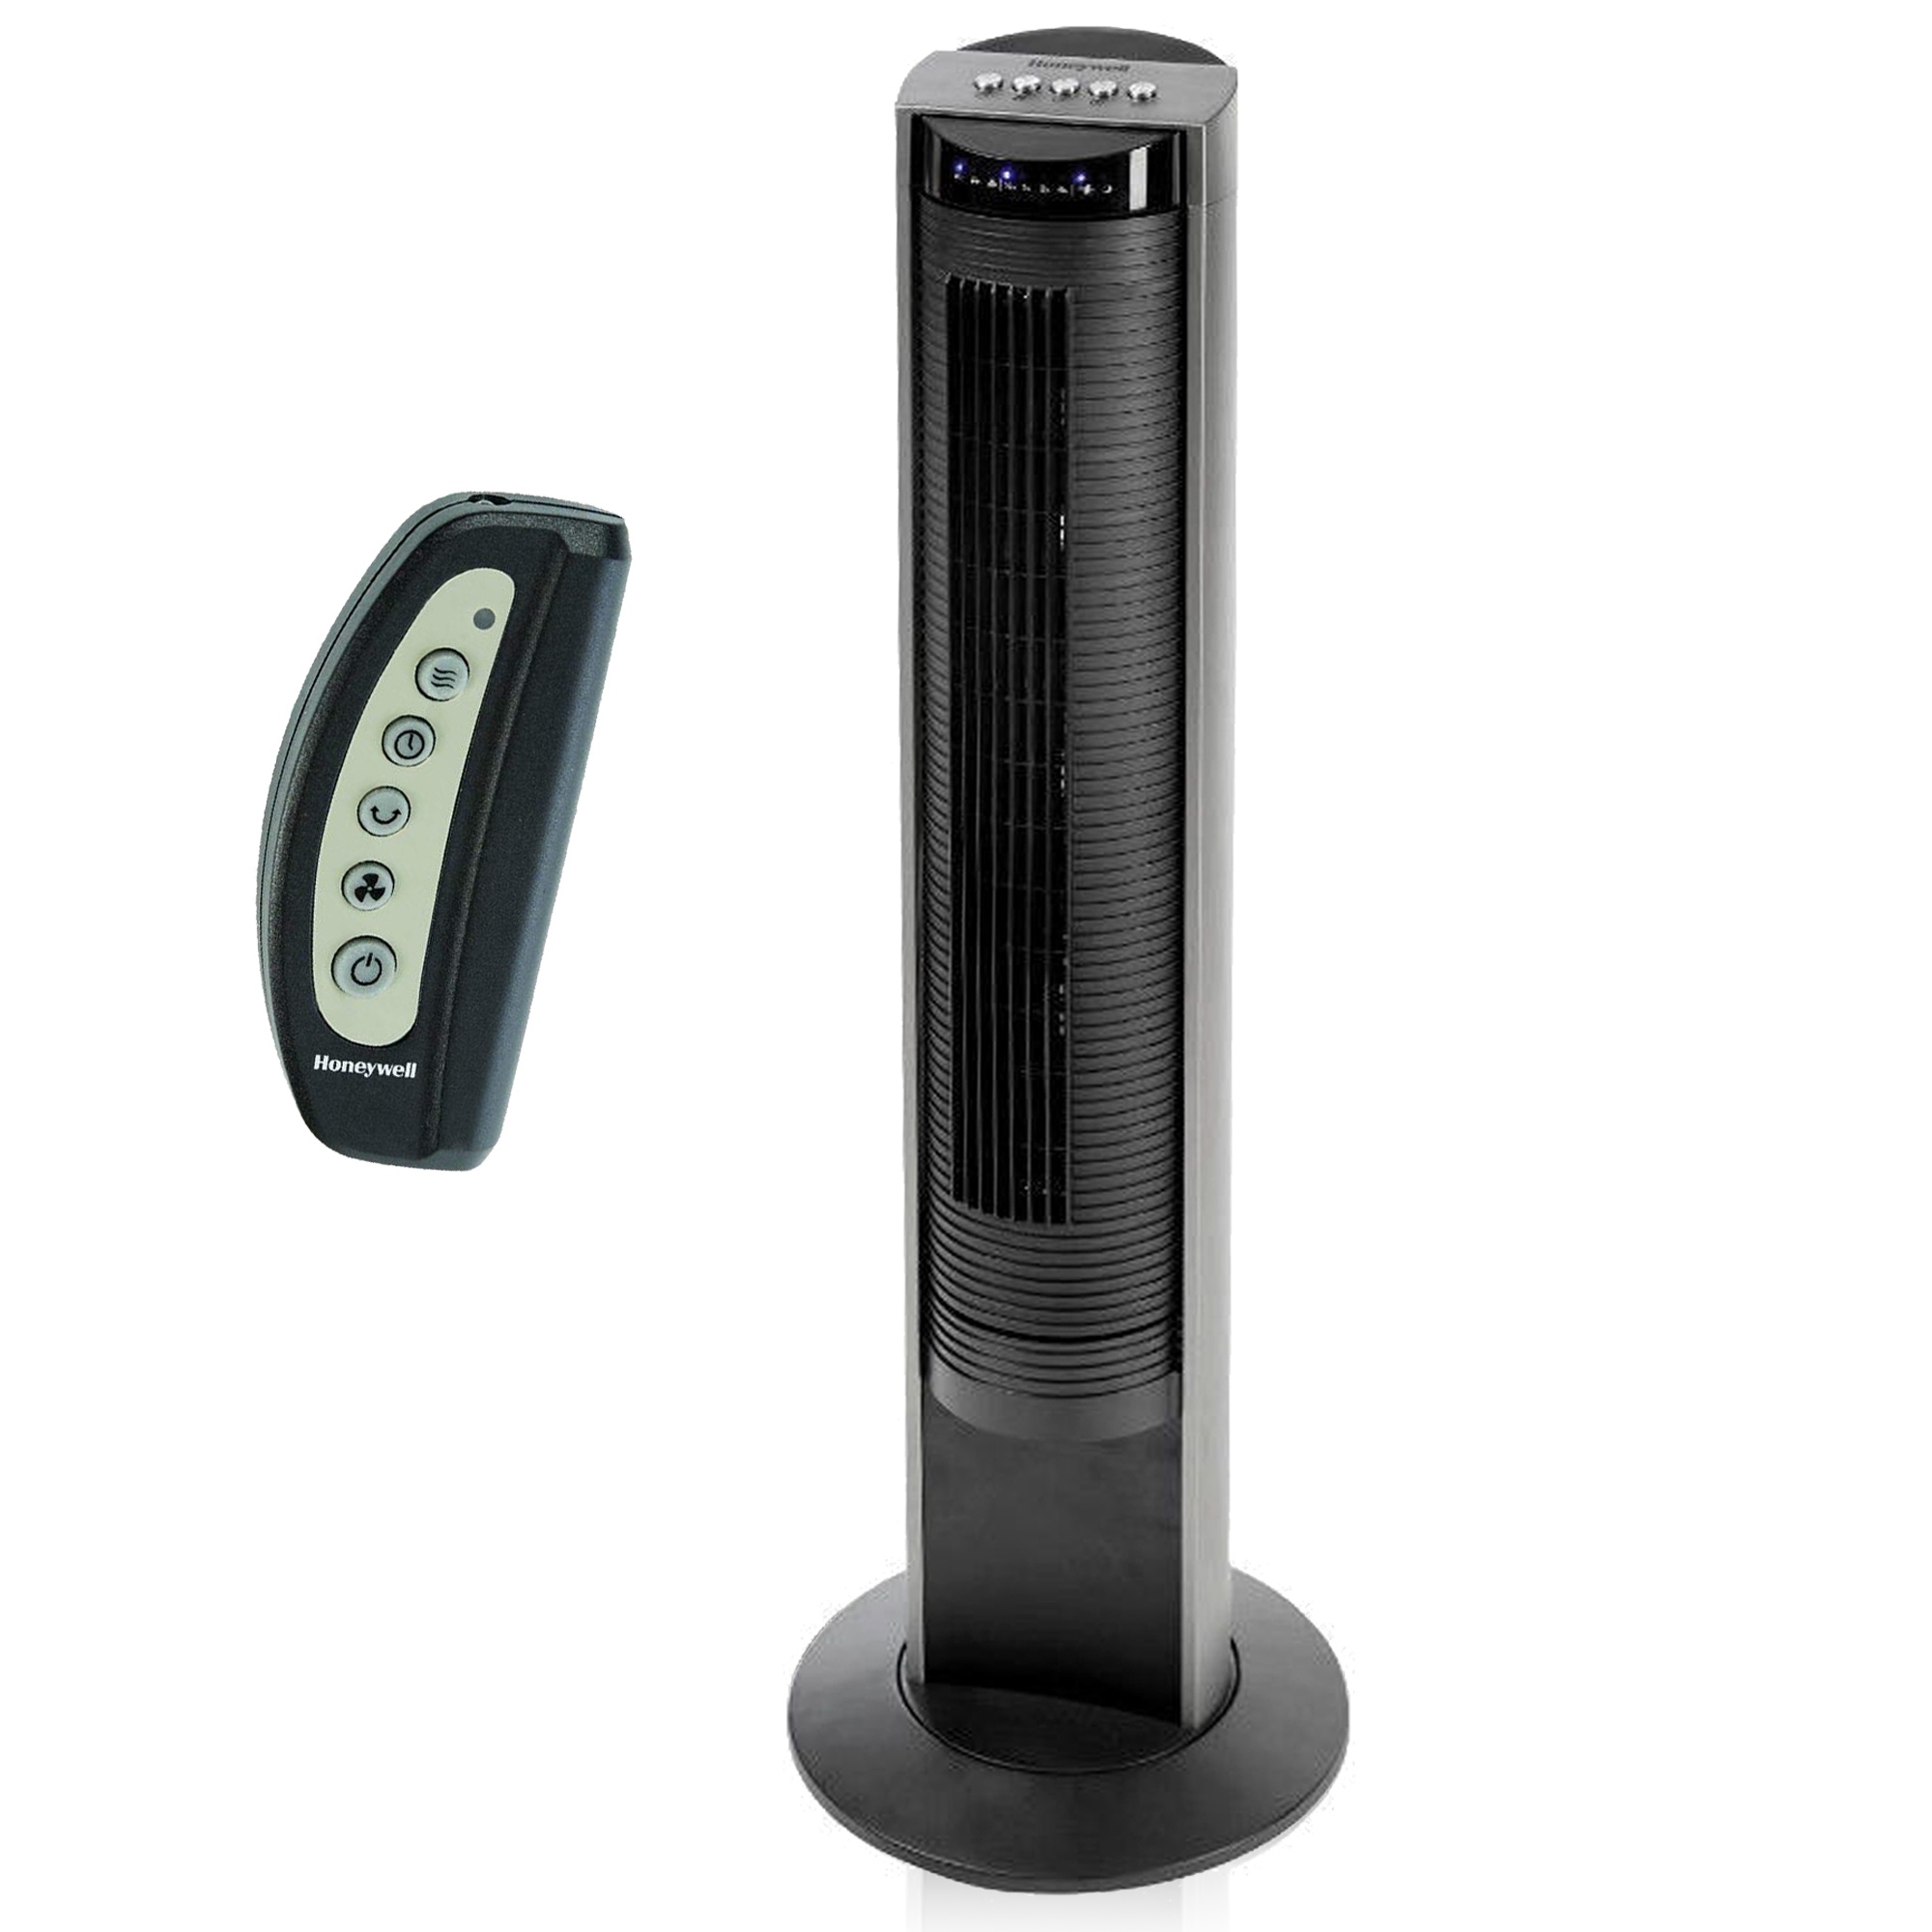 Honeywell Ho 5500re Oscillating Tower Fan With Remote Control Gliding Grill 4022167550040 Ebay